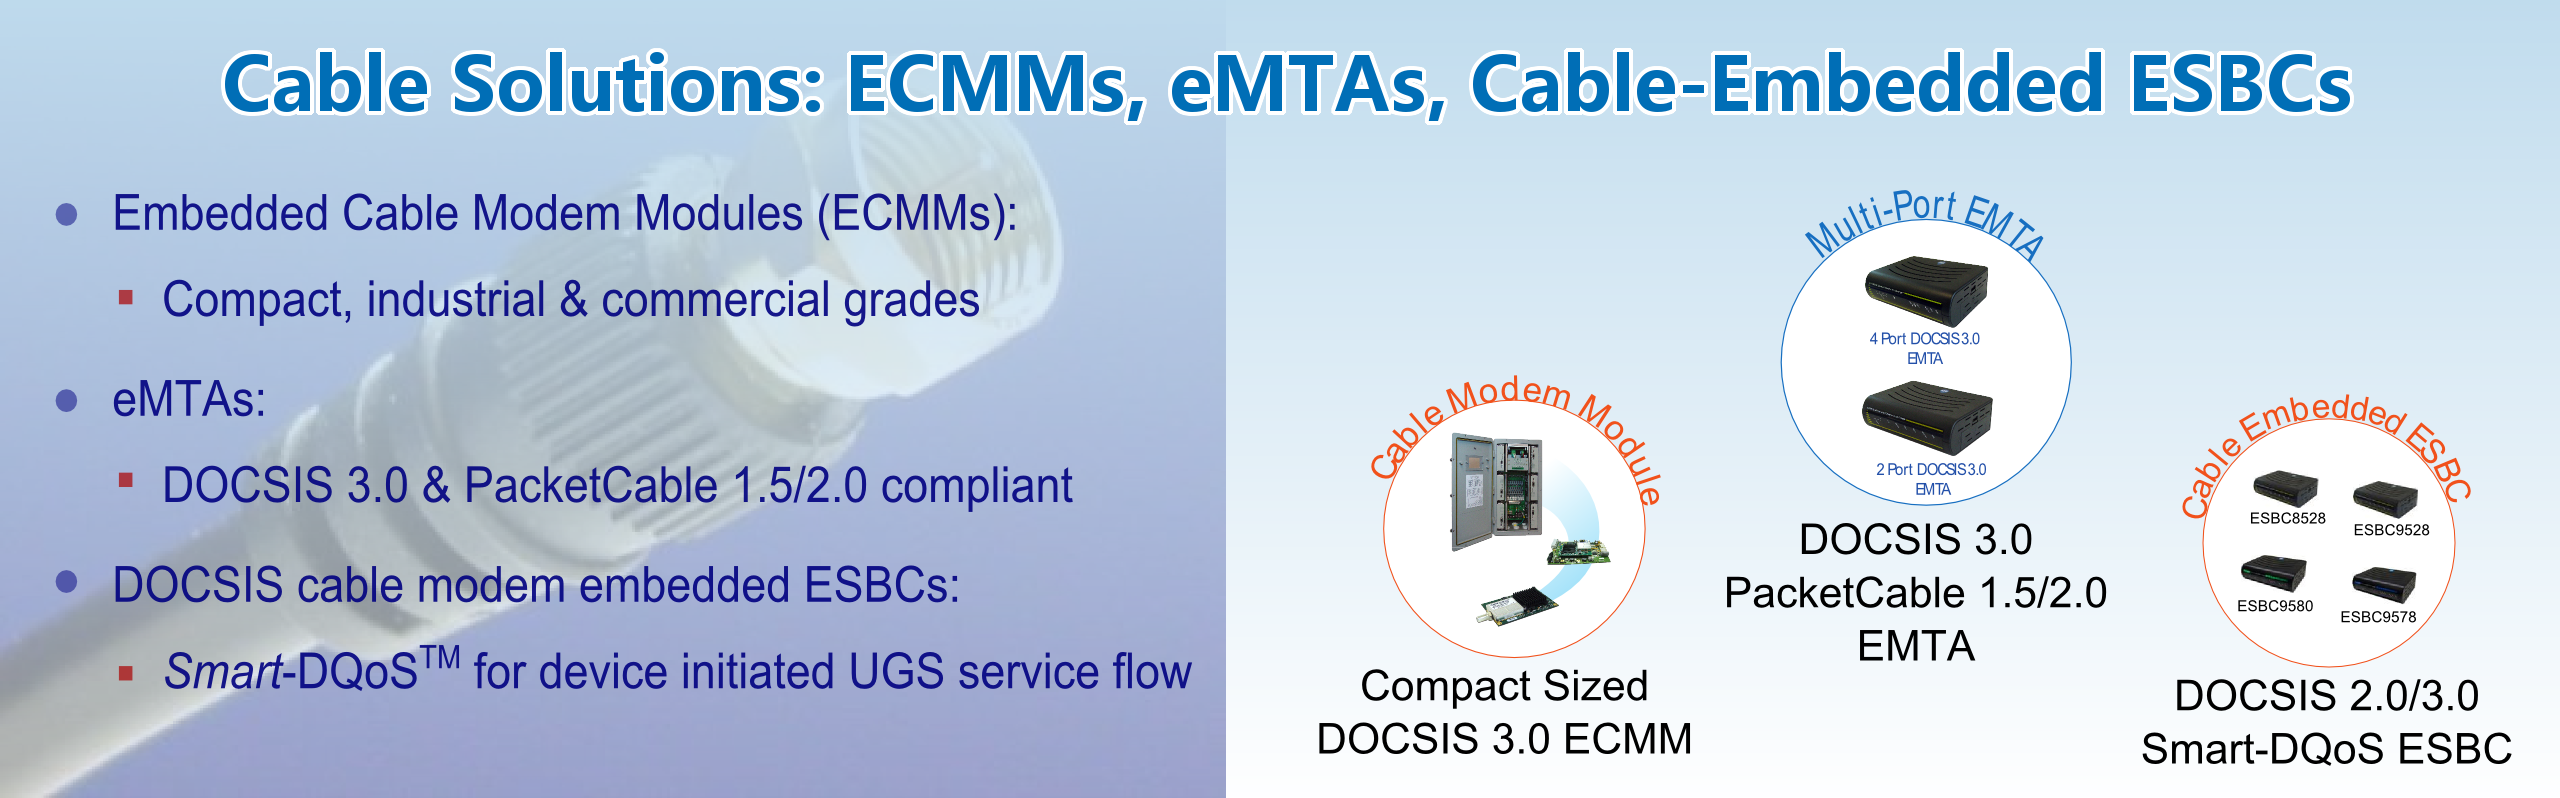 Cable Solutions: ECMMs, eMTAs, Cable-Embedded ESBCs